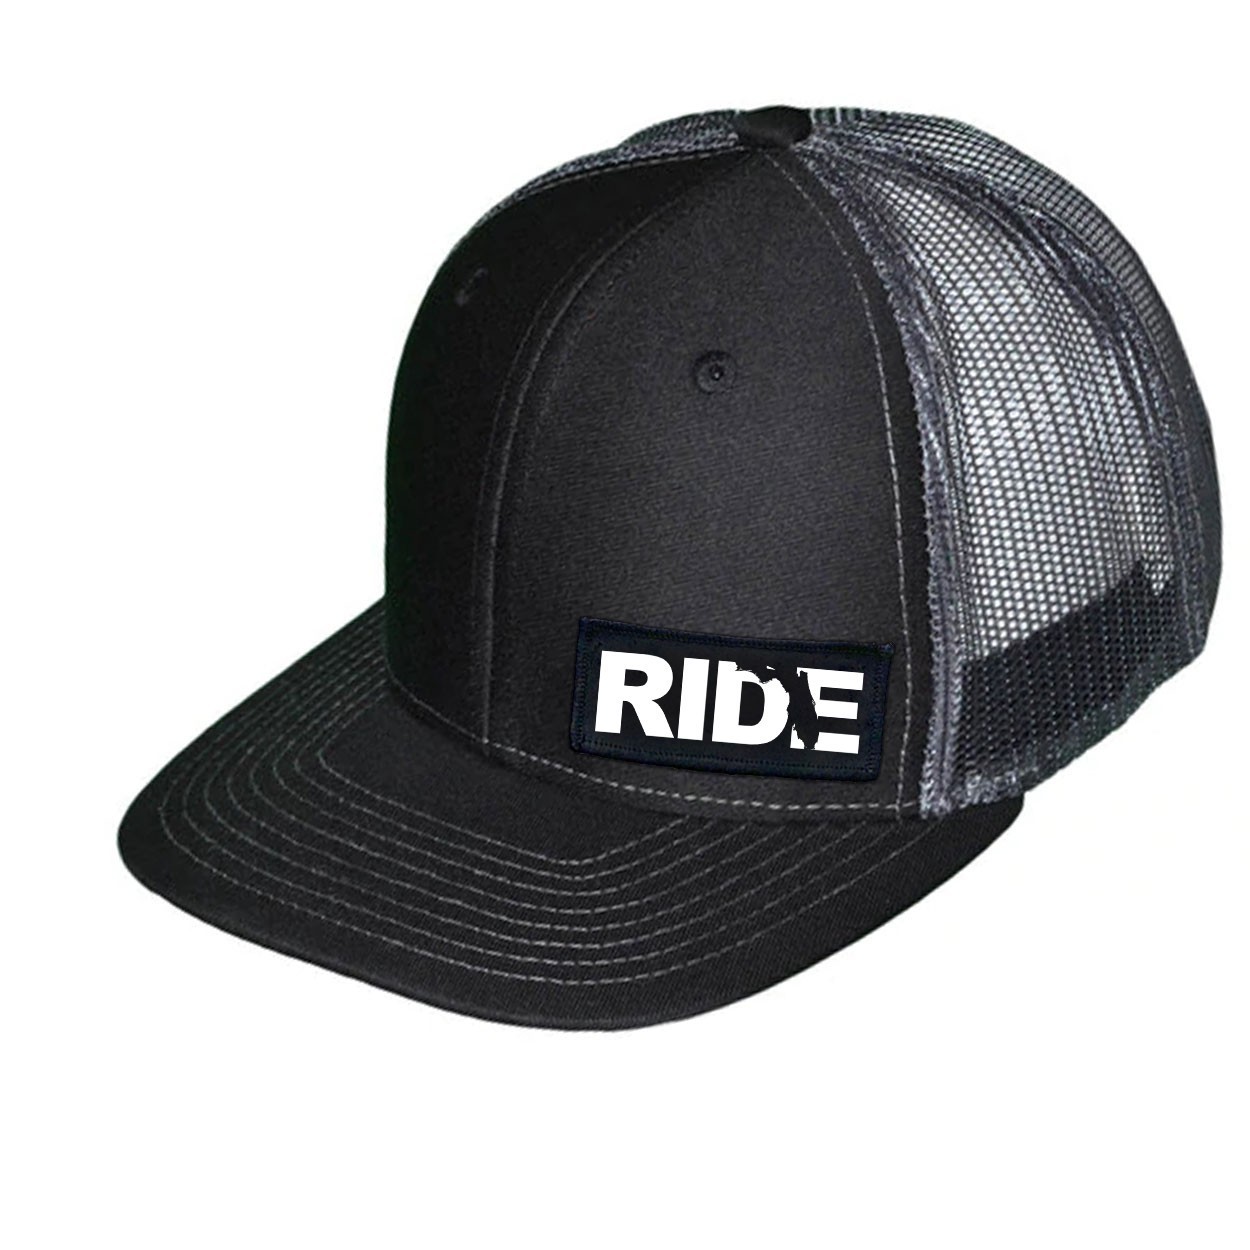 Ride Florida Night Out Woven Patch Snapback Trucker Hat Black/Charcoal (White Logo)